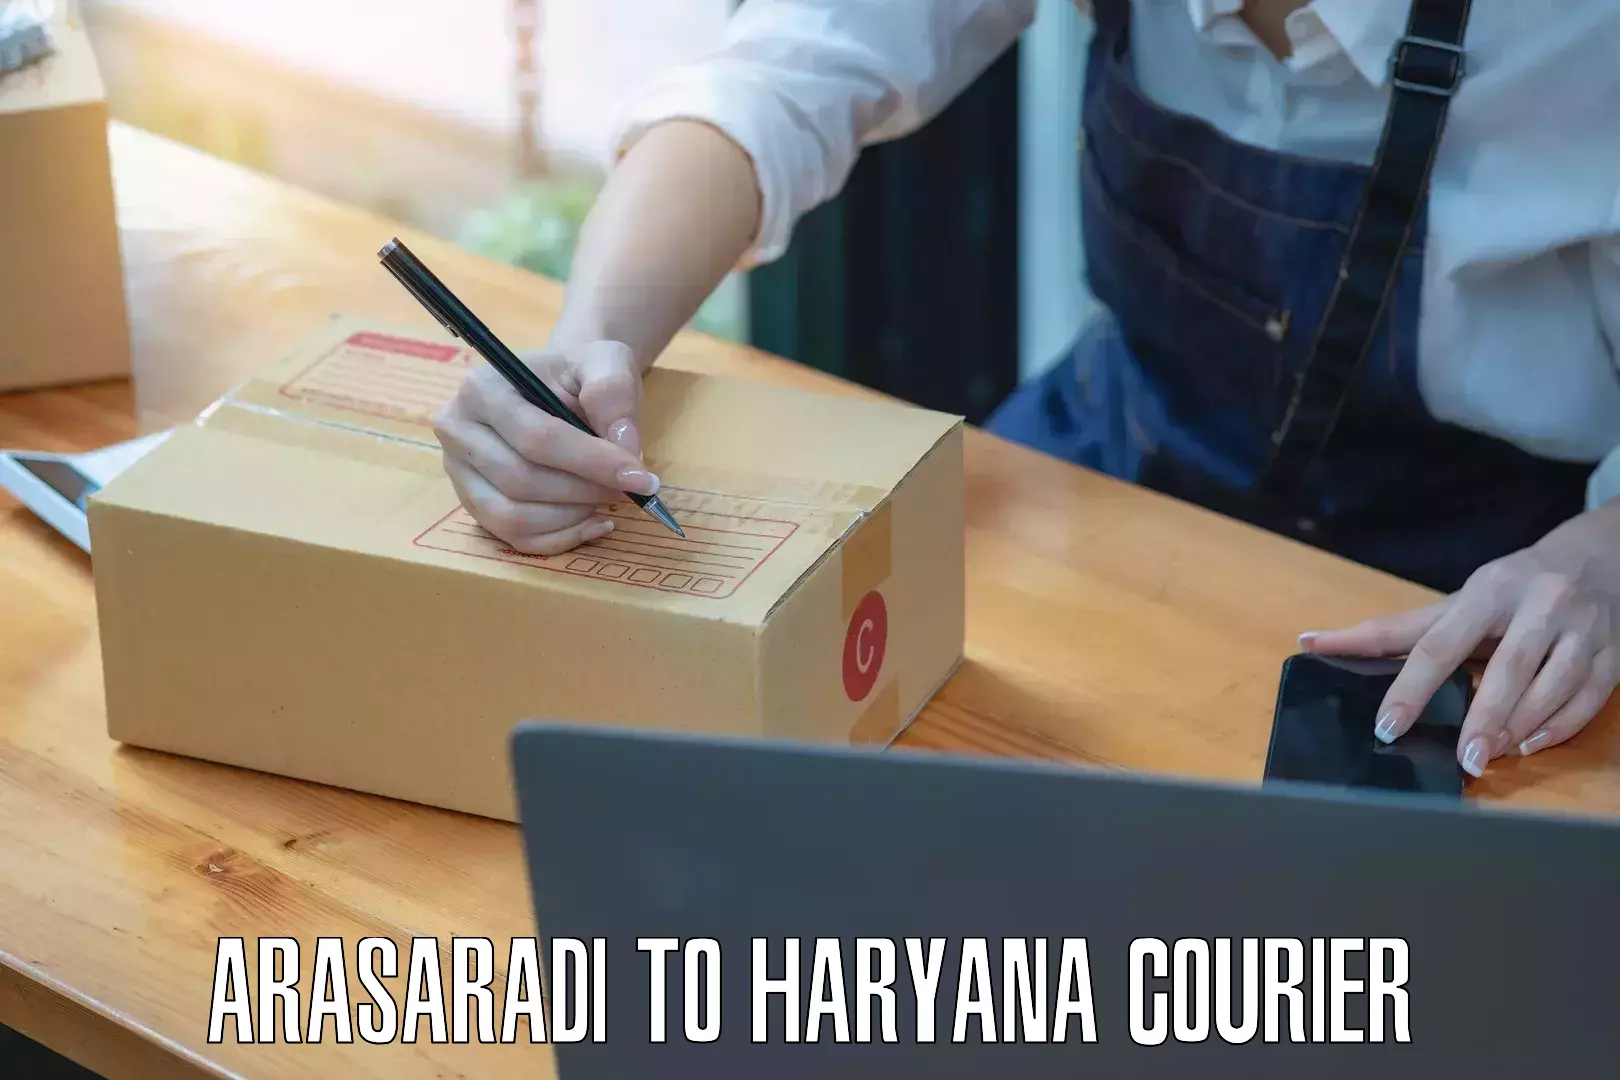 State-of-the-art courier technology Arasaradi to Haryana